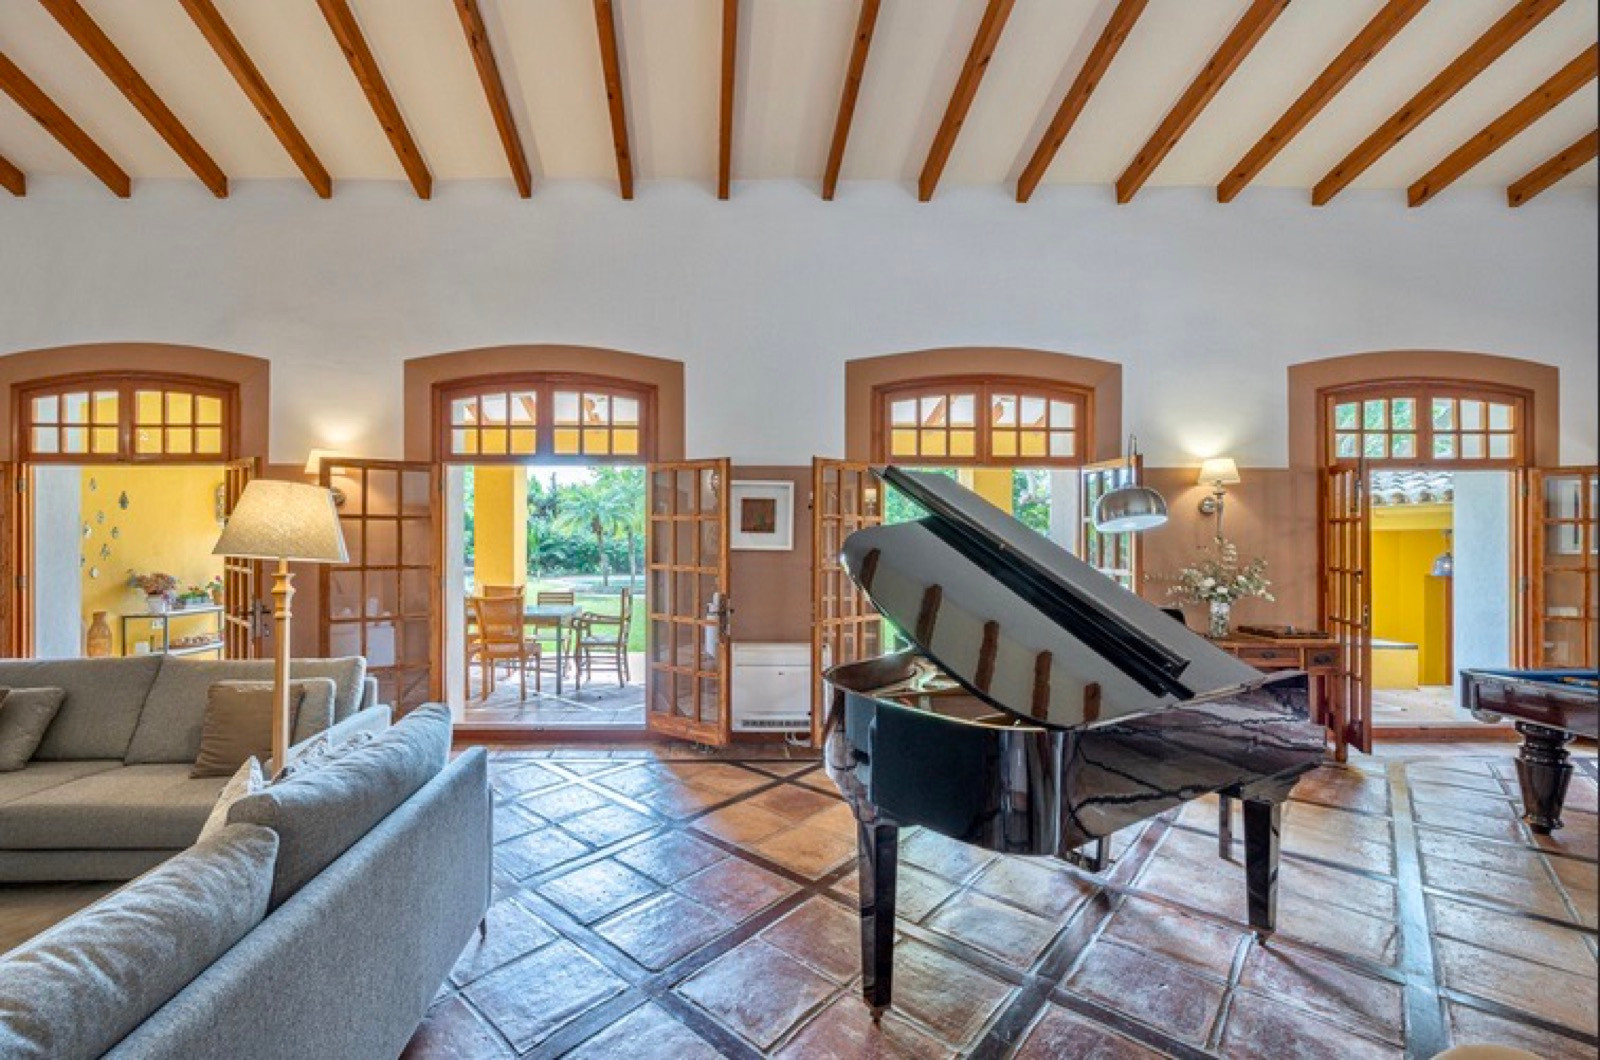 Beautiful family villa situated front line golf in El Paraiso